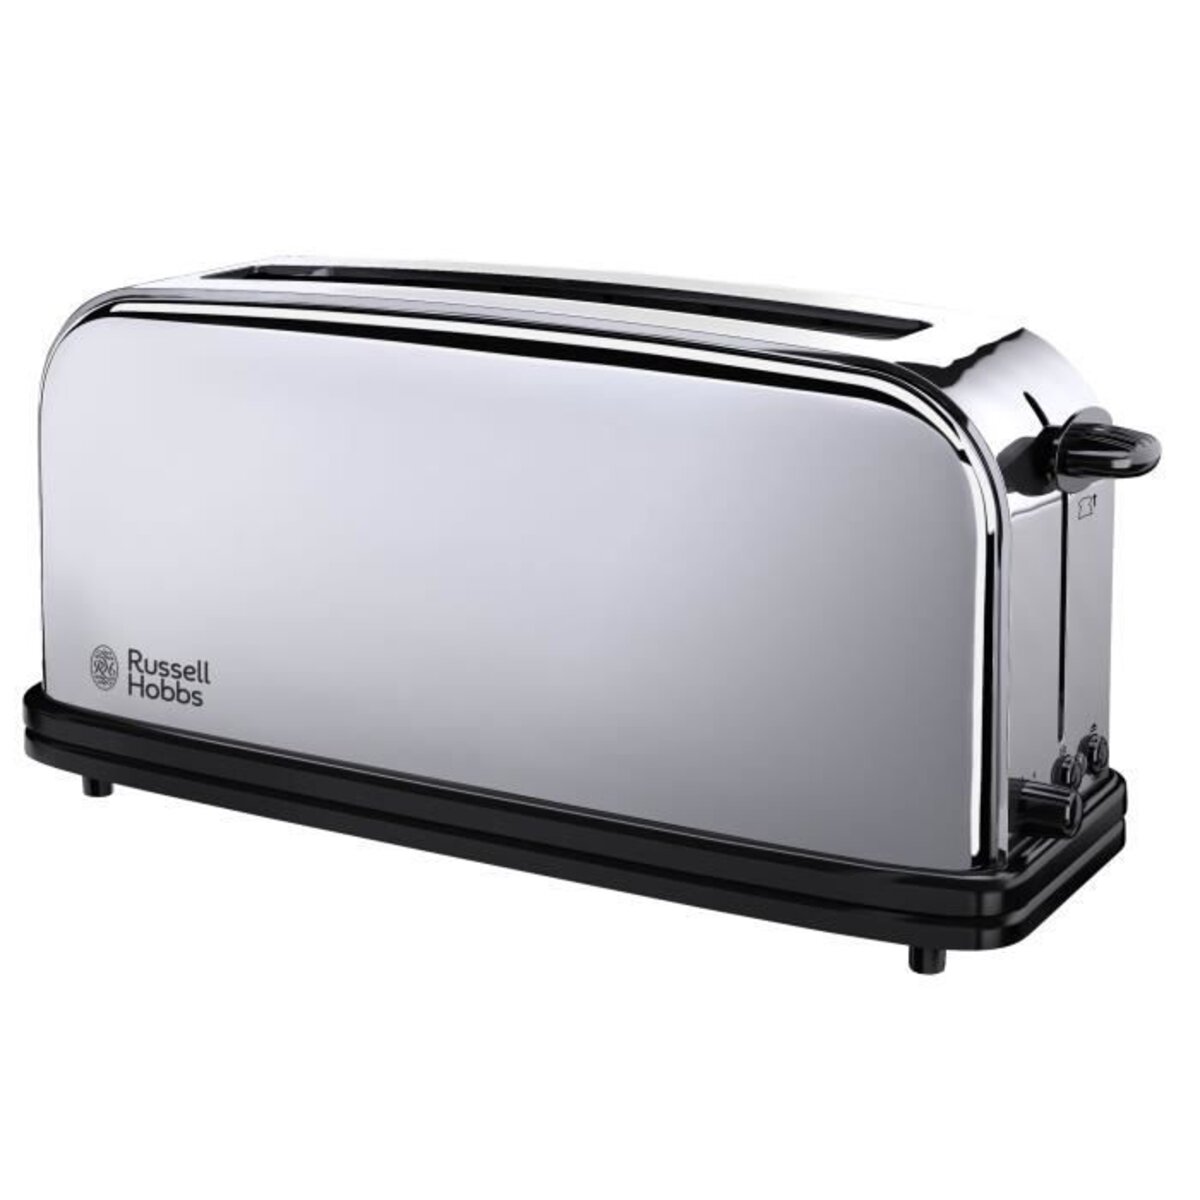 Grille Pain Inox, grille-pain 1000W - 2 Large Fente Toaster - 6